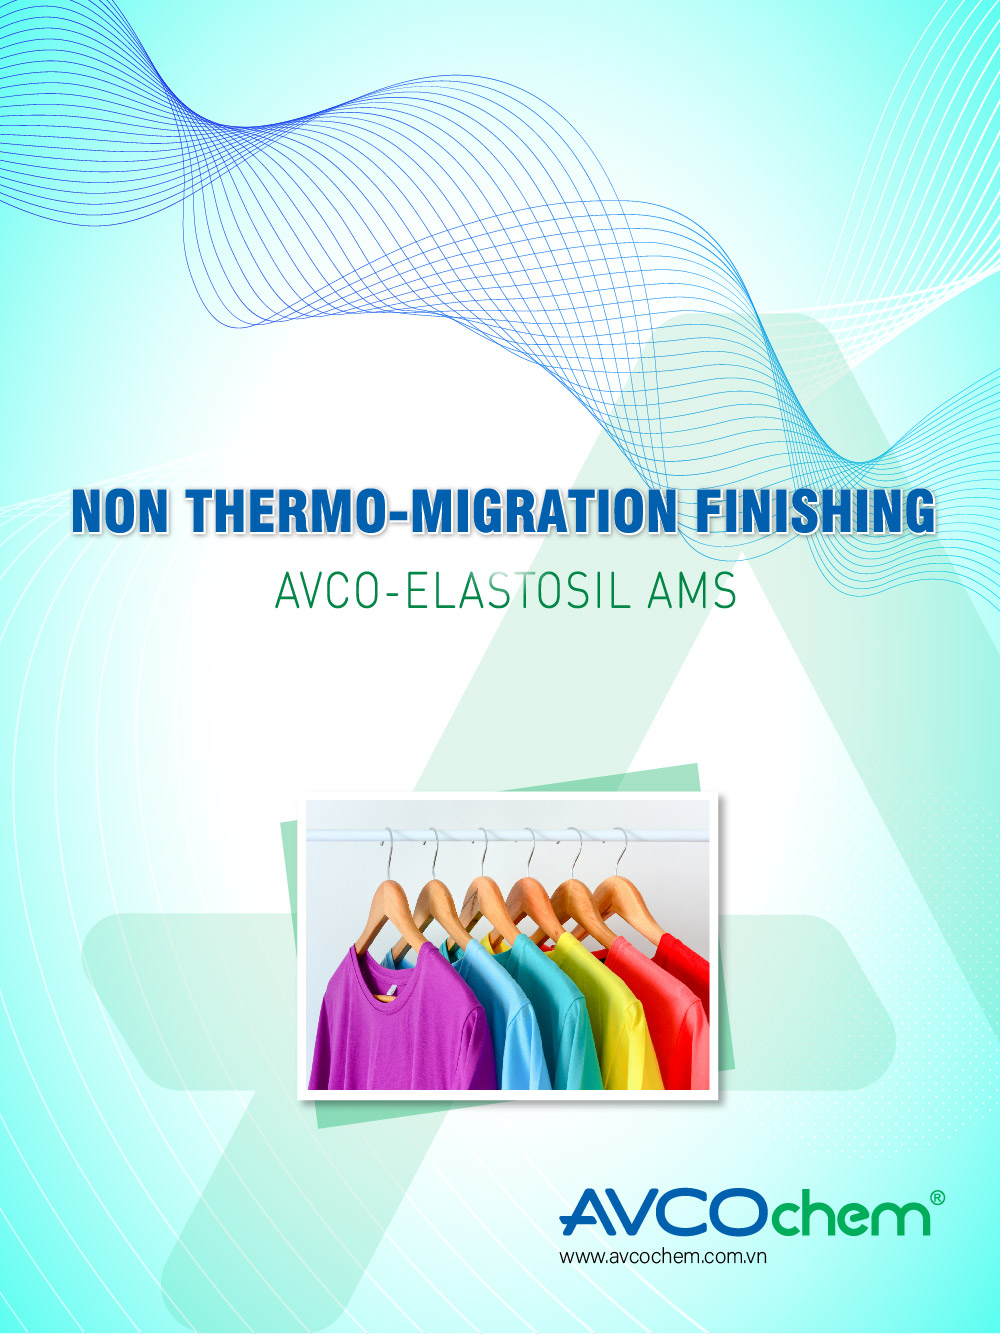 NON THERMO-MIGRATION FINISHING